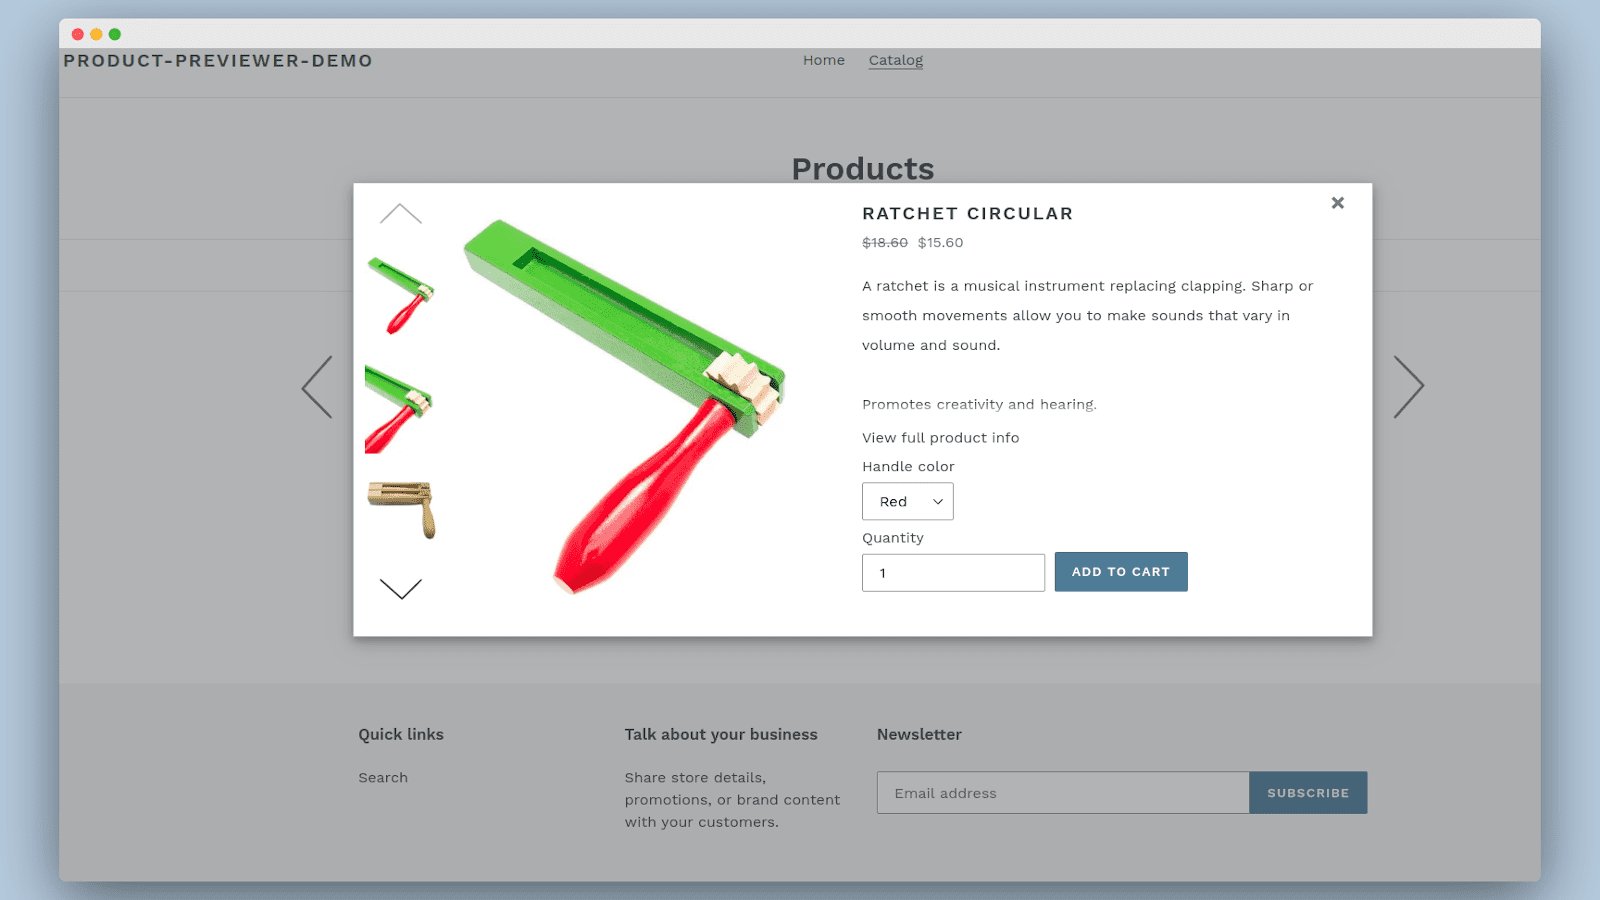 Preview modal for product with one option